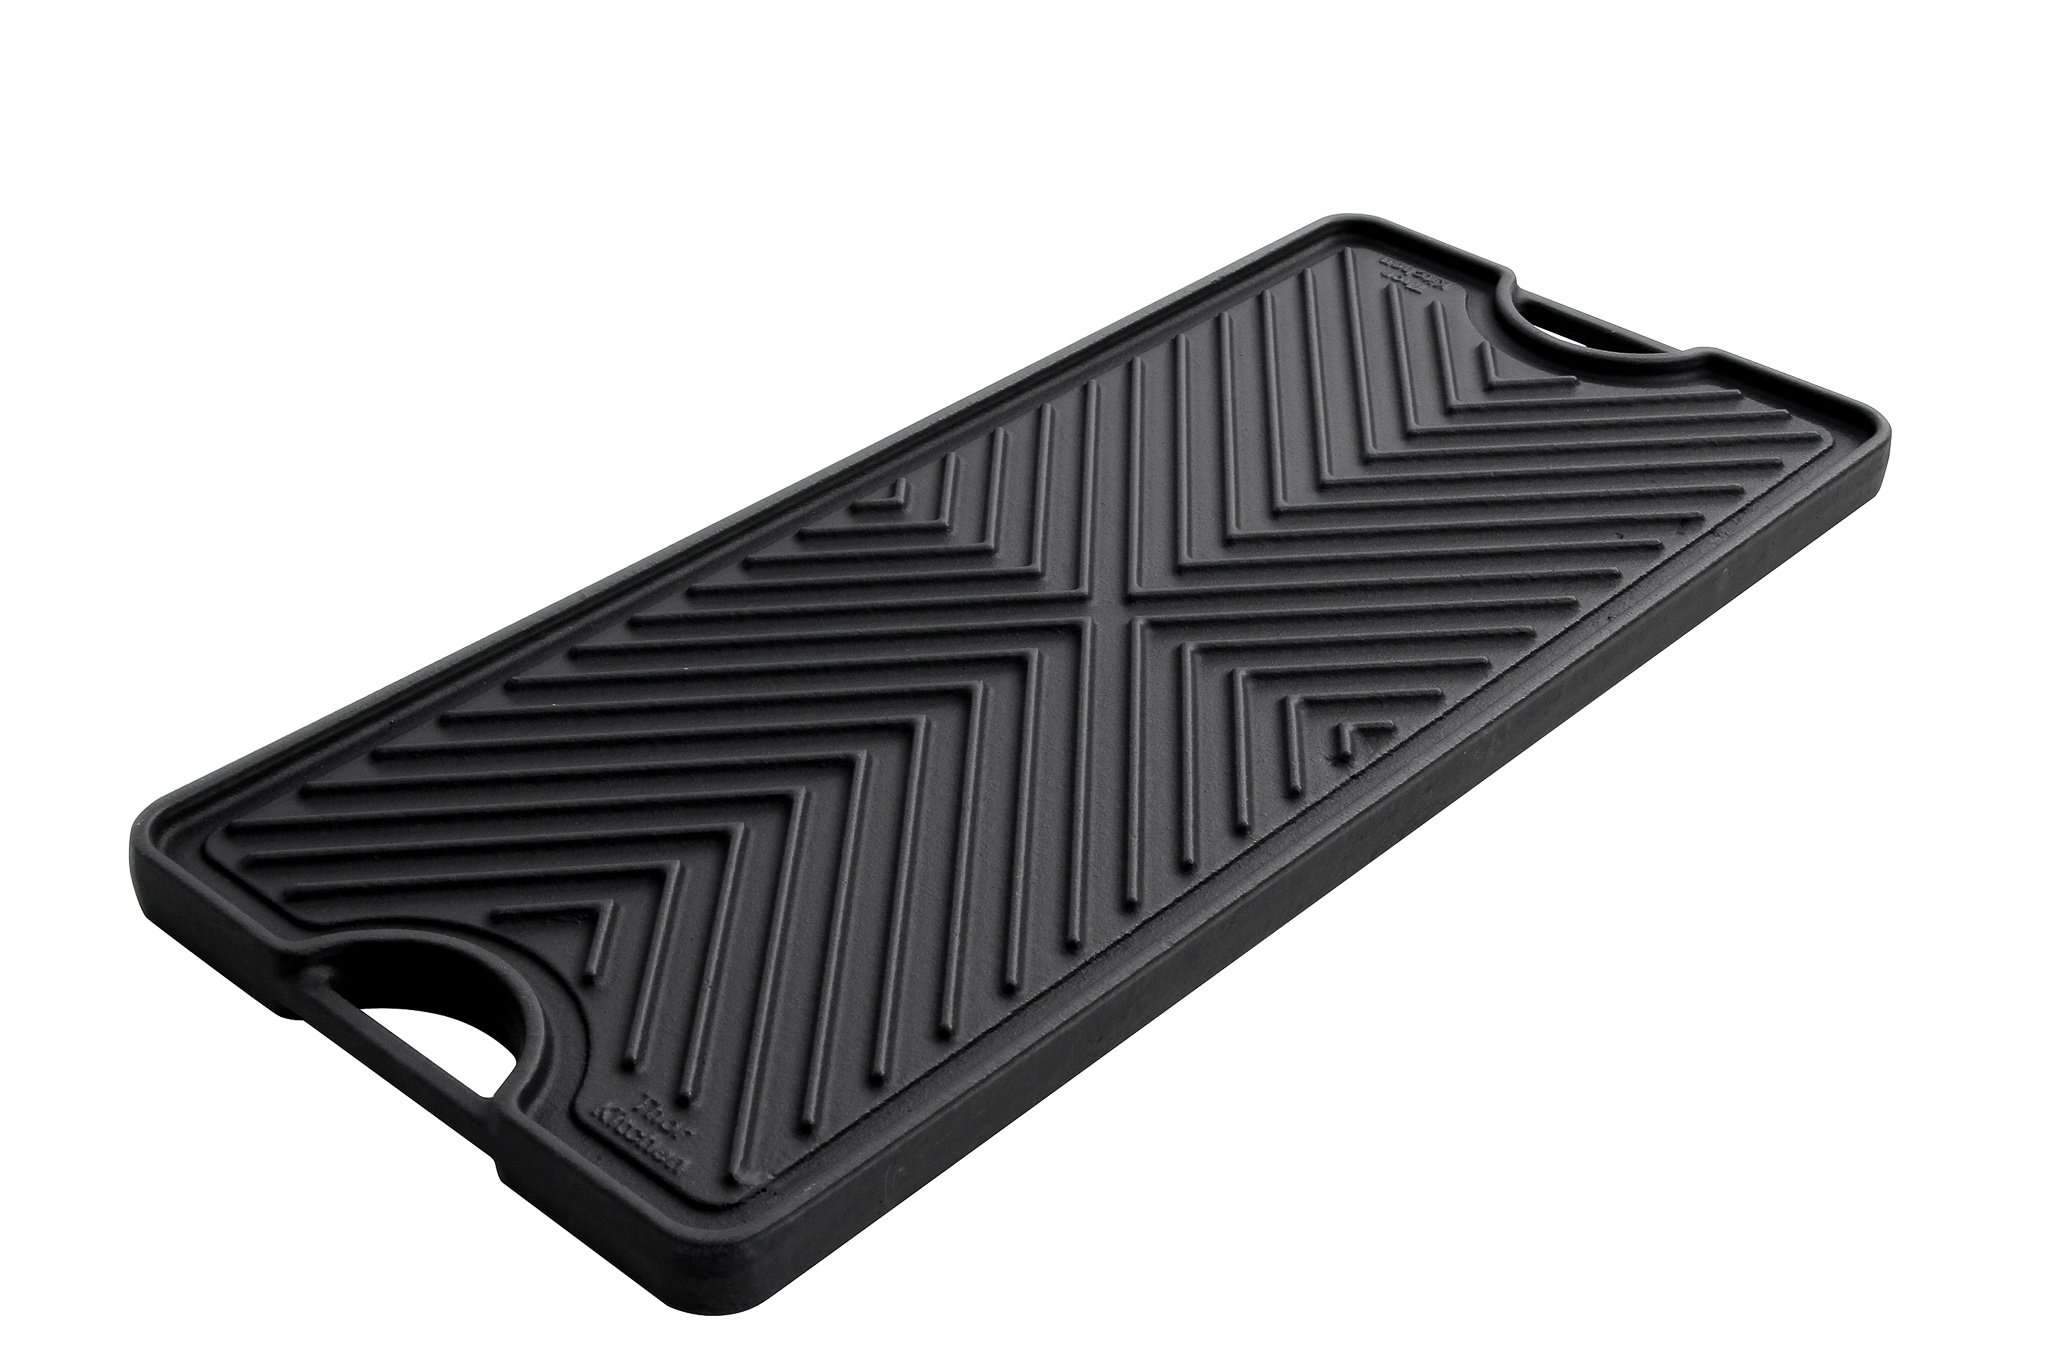 Thor Kitchen RG1032 Cast Iron Griddle Plate